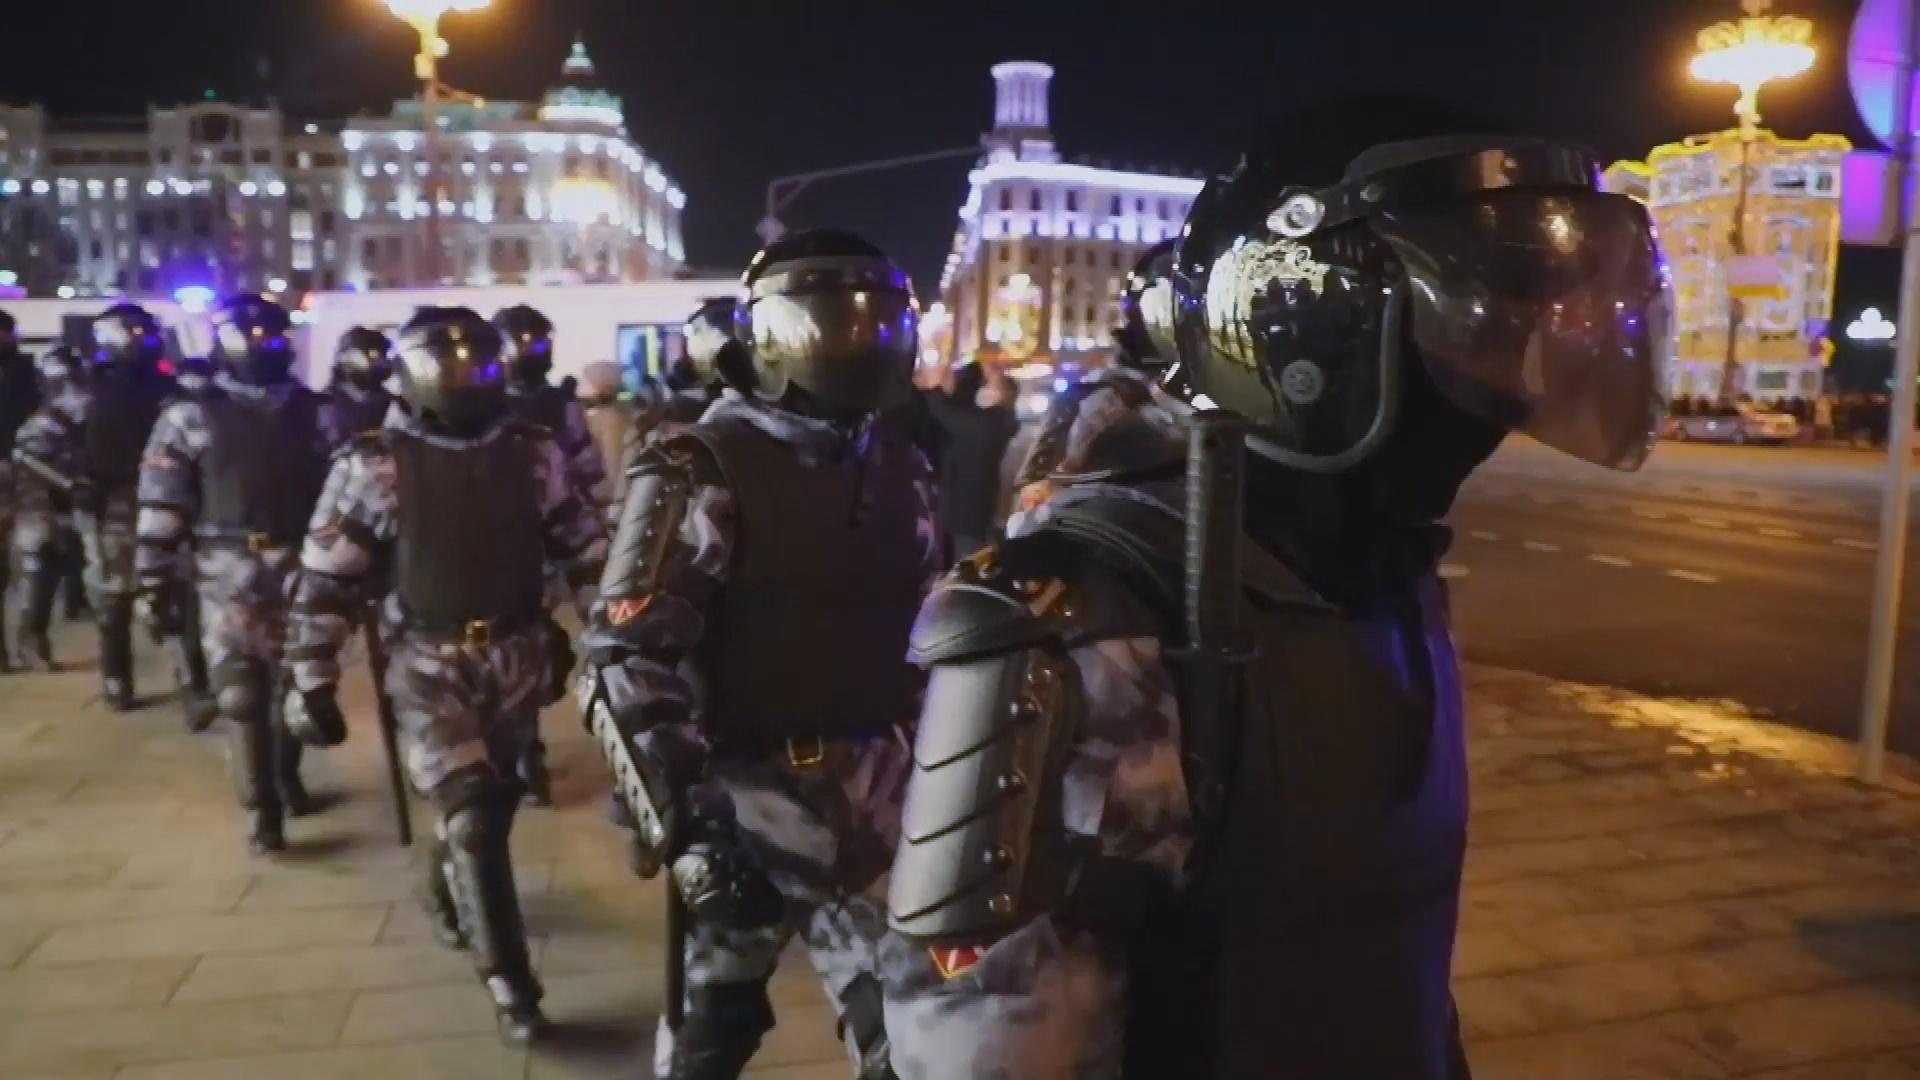 Heavily armed troops, wearing body armor, face shields and helmets, march through the streets of Moscow at night. From Gesbeen Mohammed’s ‘Putin’s War at Home,’ a ‘Frontline’ production currently streaming on PBS.org. Courtesy of ‘Frontline’.